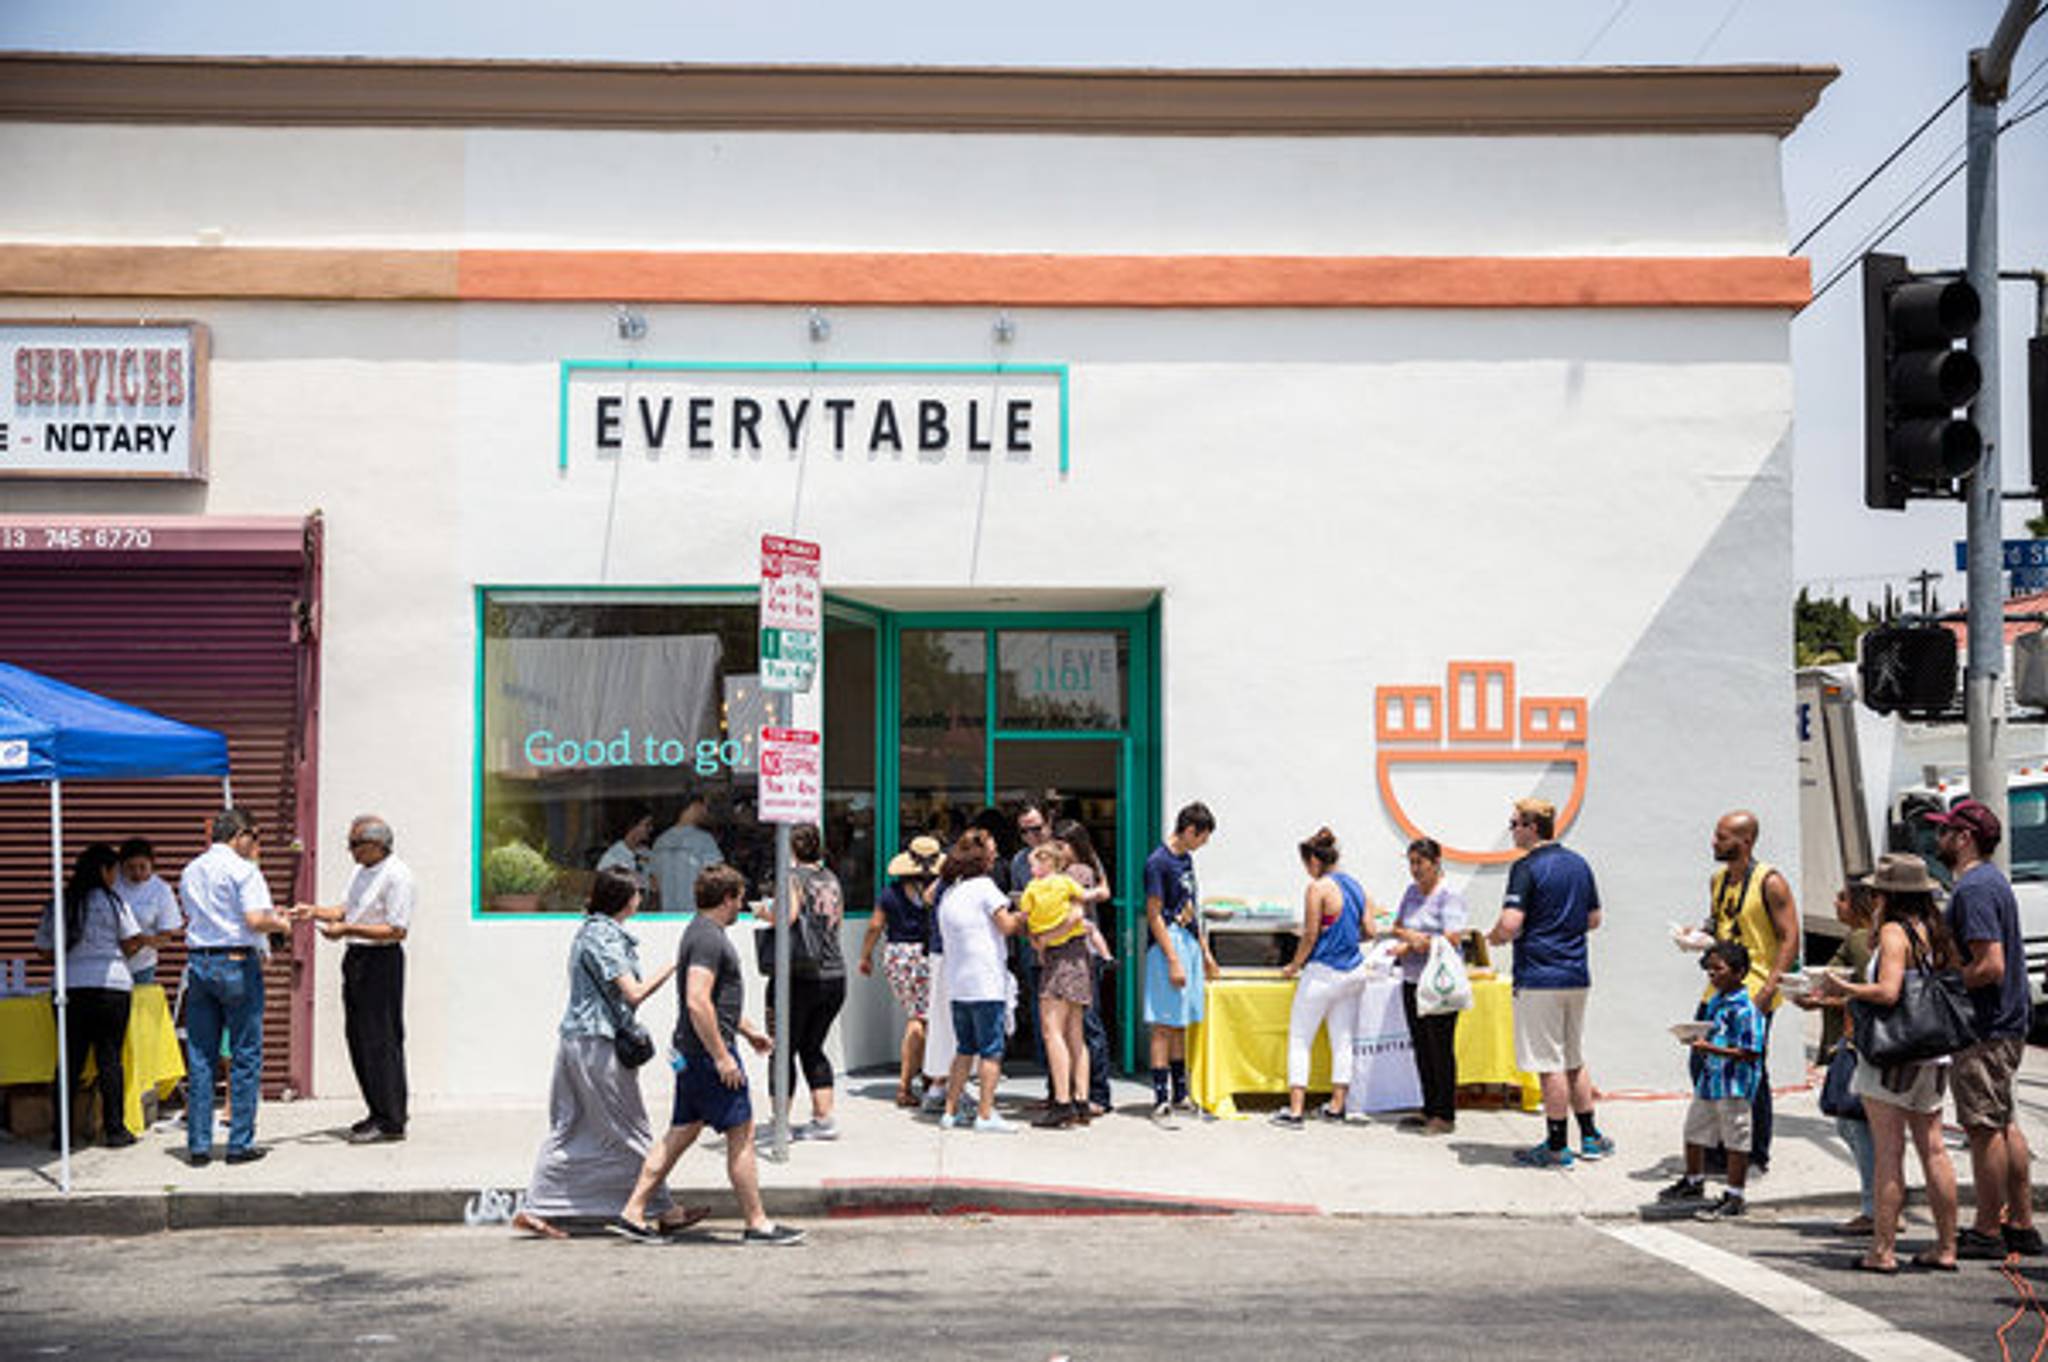 Everytable meets demand for affordable healthy food